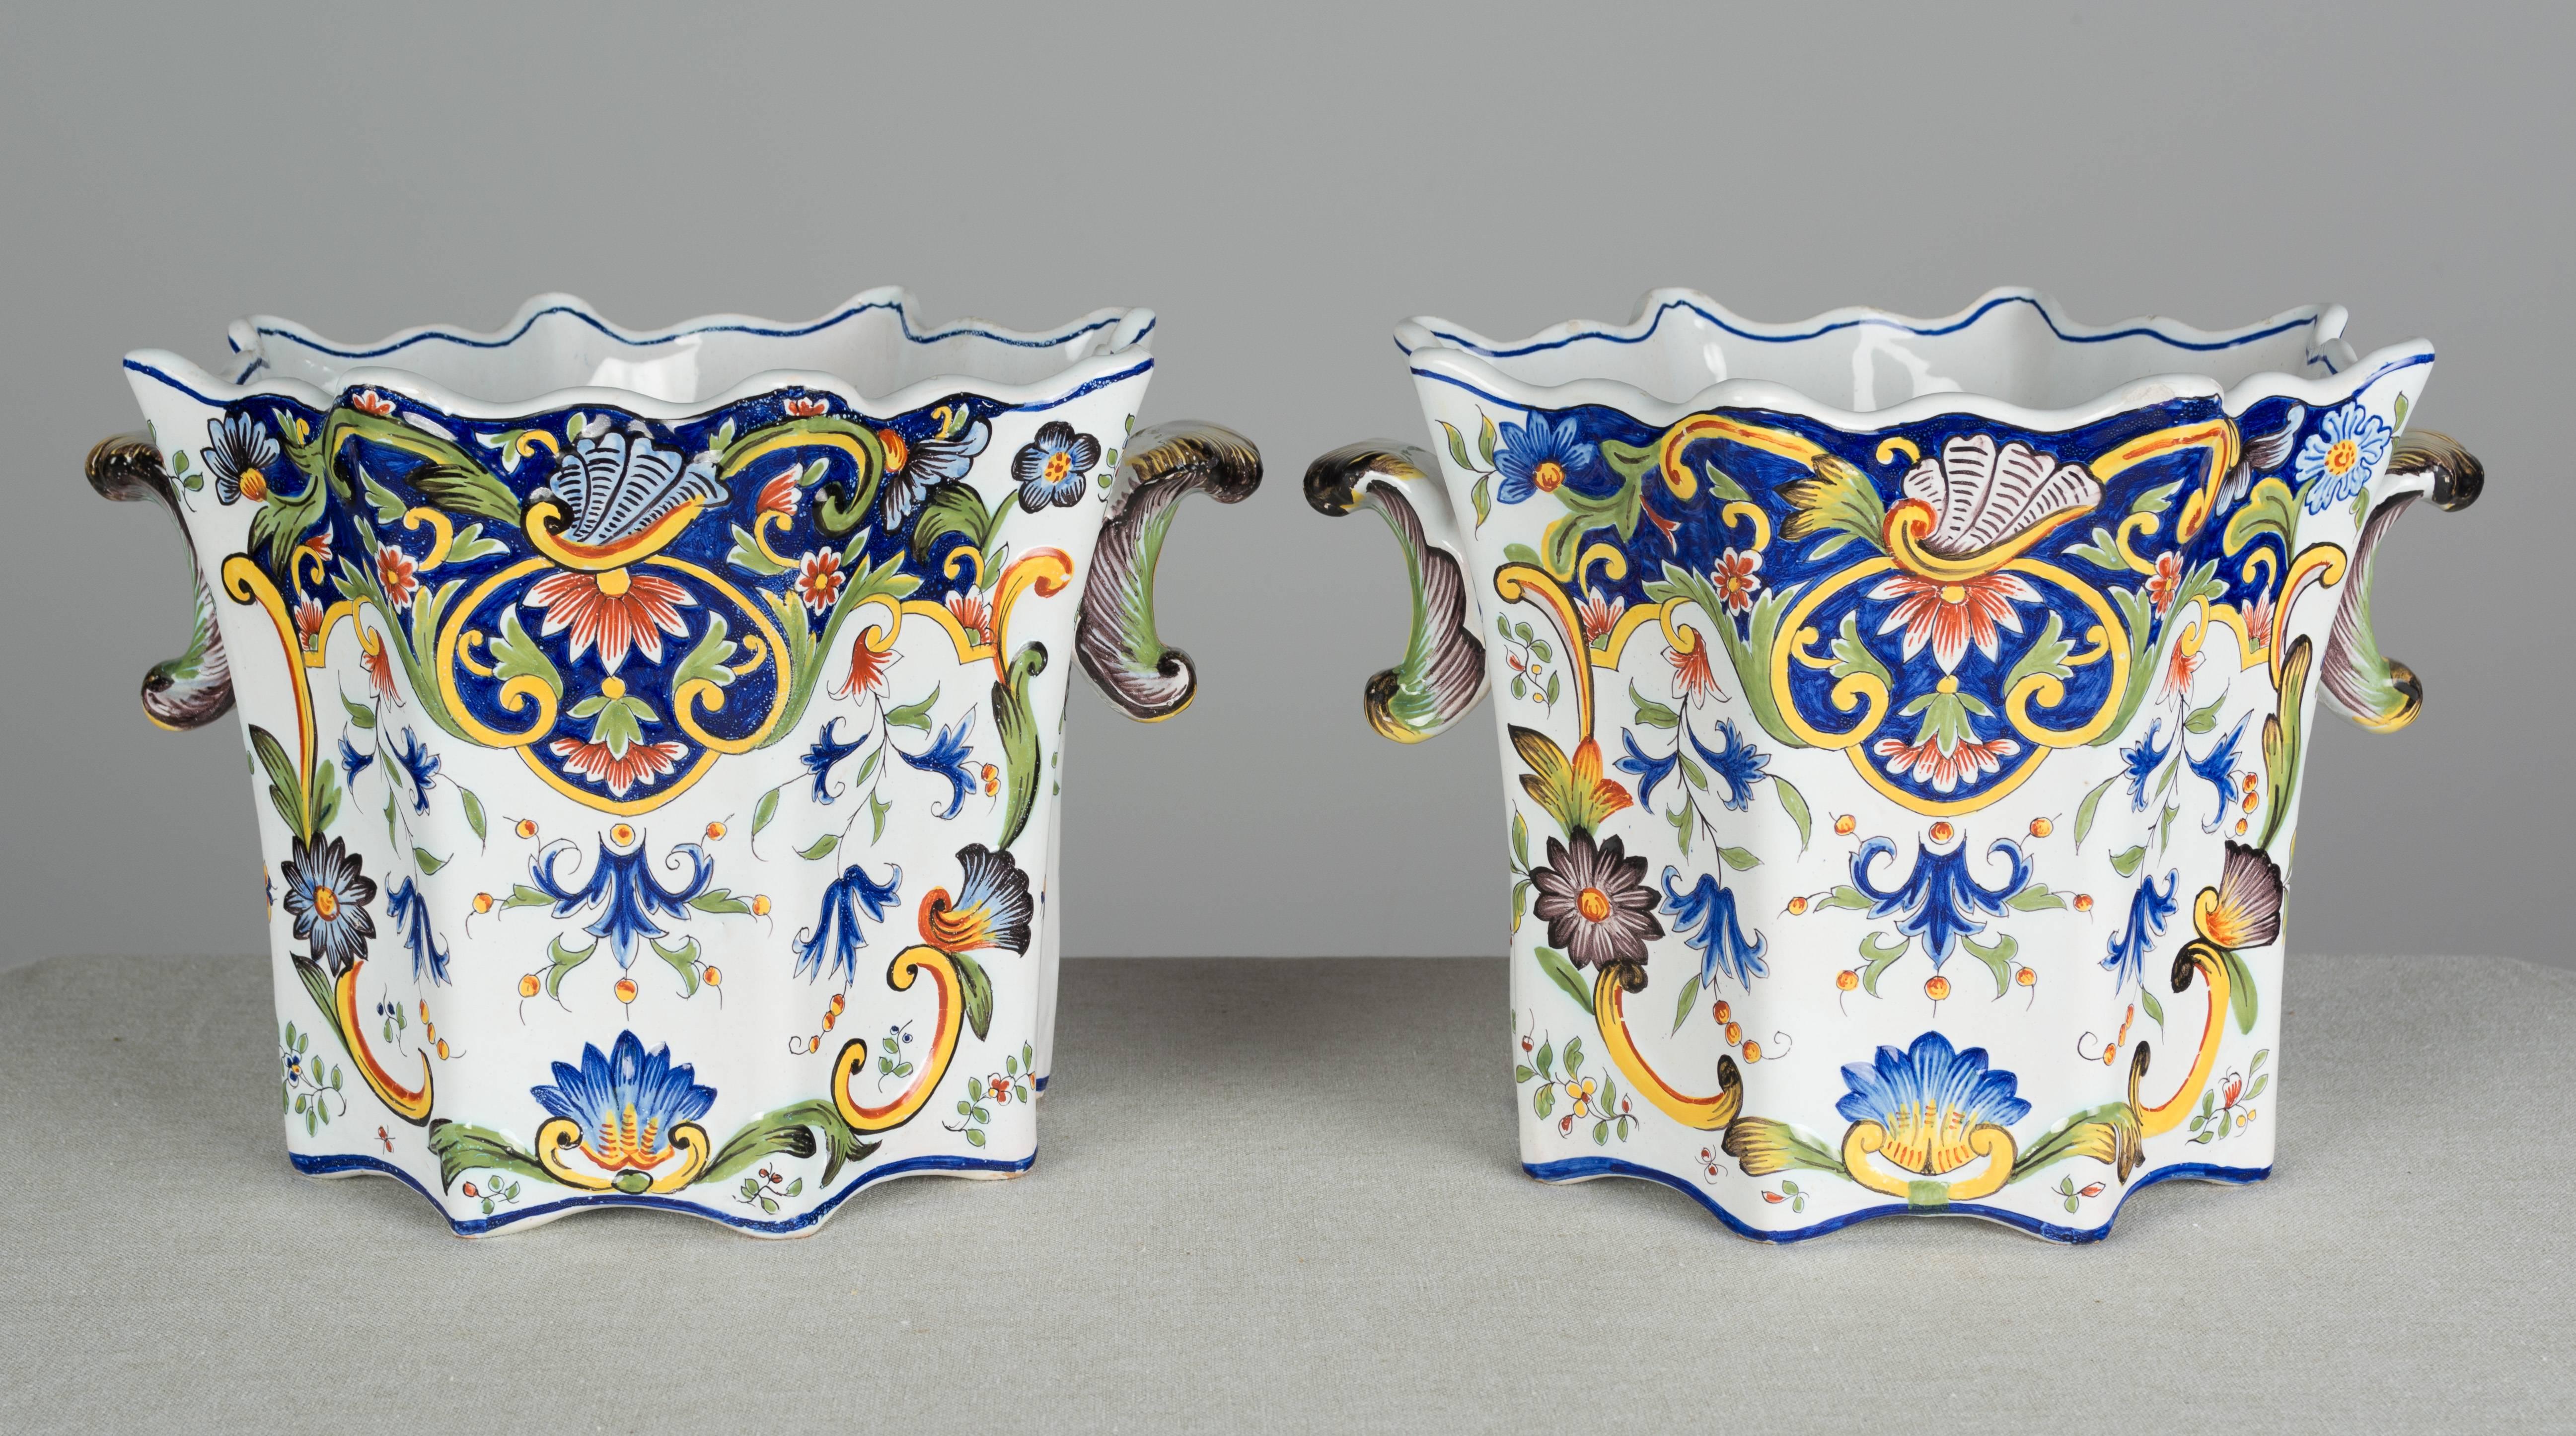 Pair of 19th century. French faience Fourmaintraux Desvres cache pots, or planters. Hand-painted in typical floral design with beautiful vivid colors of blue green and yellow on white ground. Fluted shape with scalloped edges and small handles. The